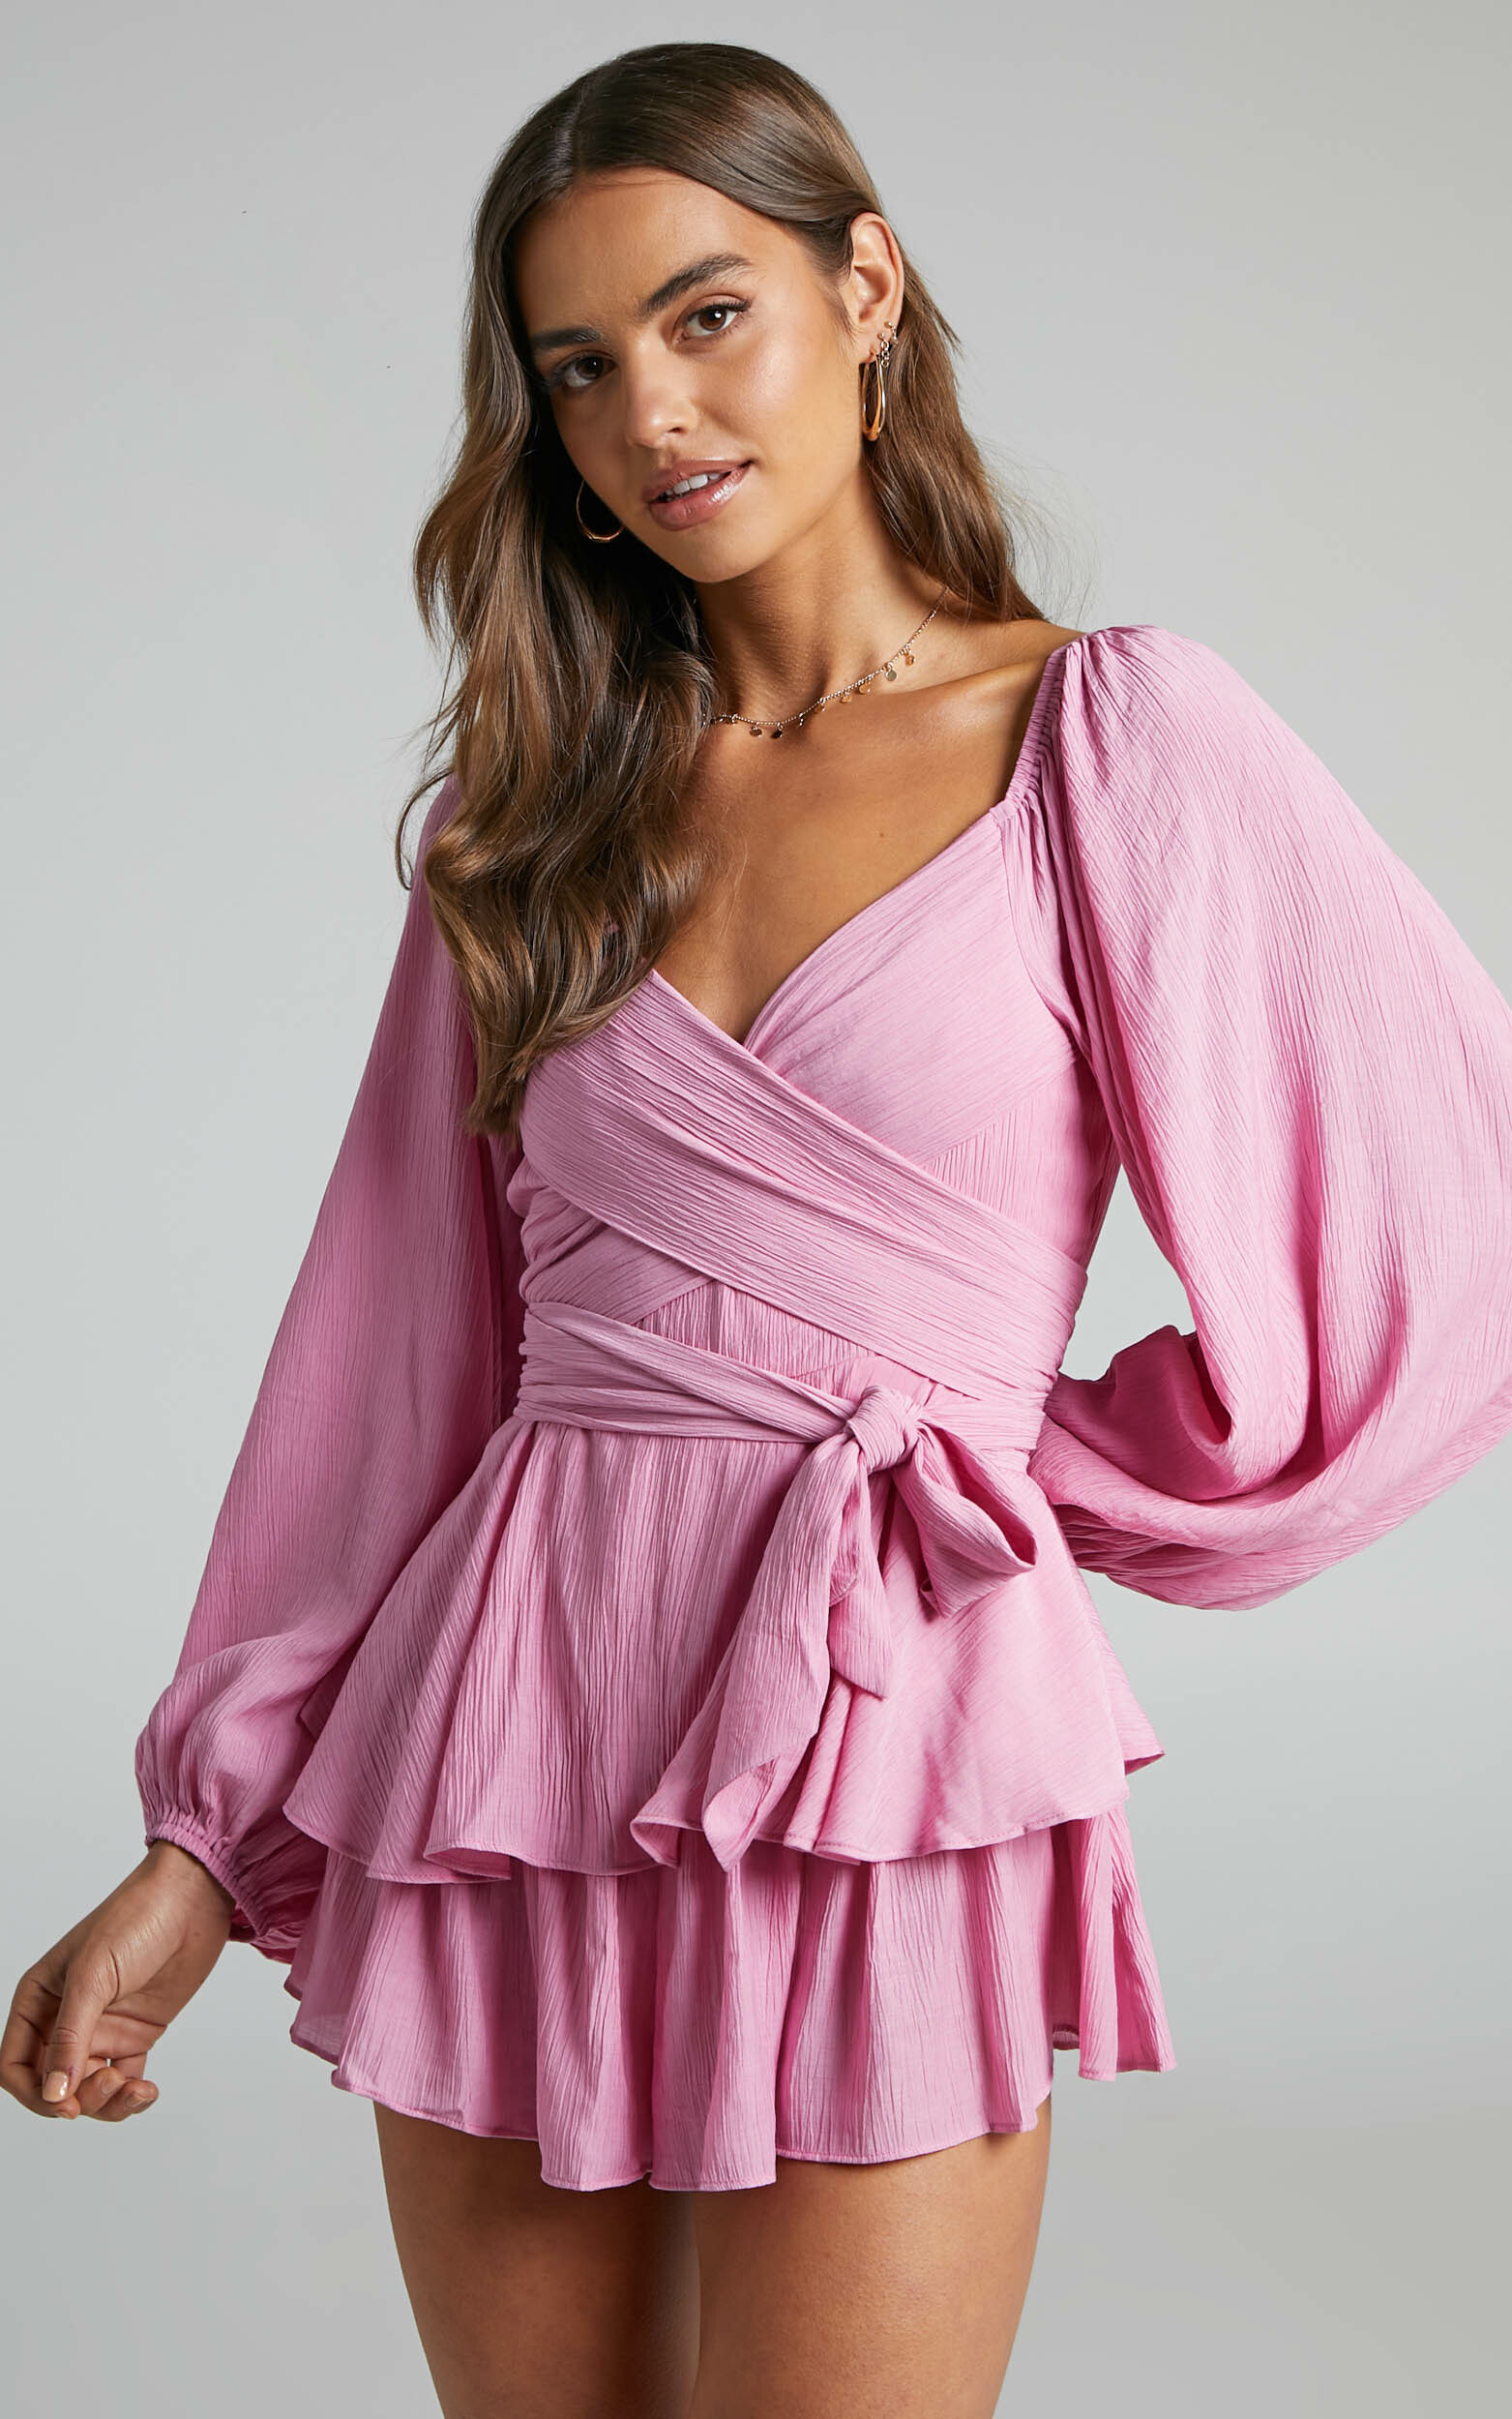 Florice Wrap Front Frill Playsuit in Pink - 04, PNK1, hi-res image number null